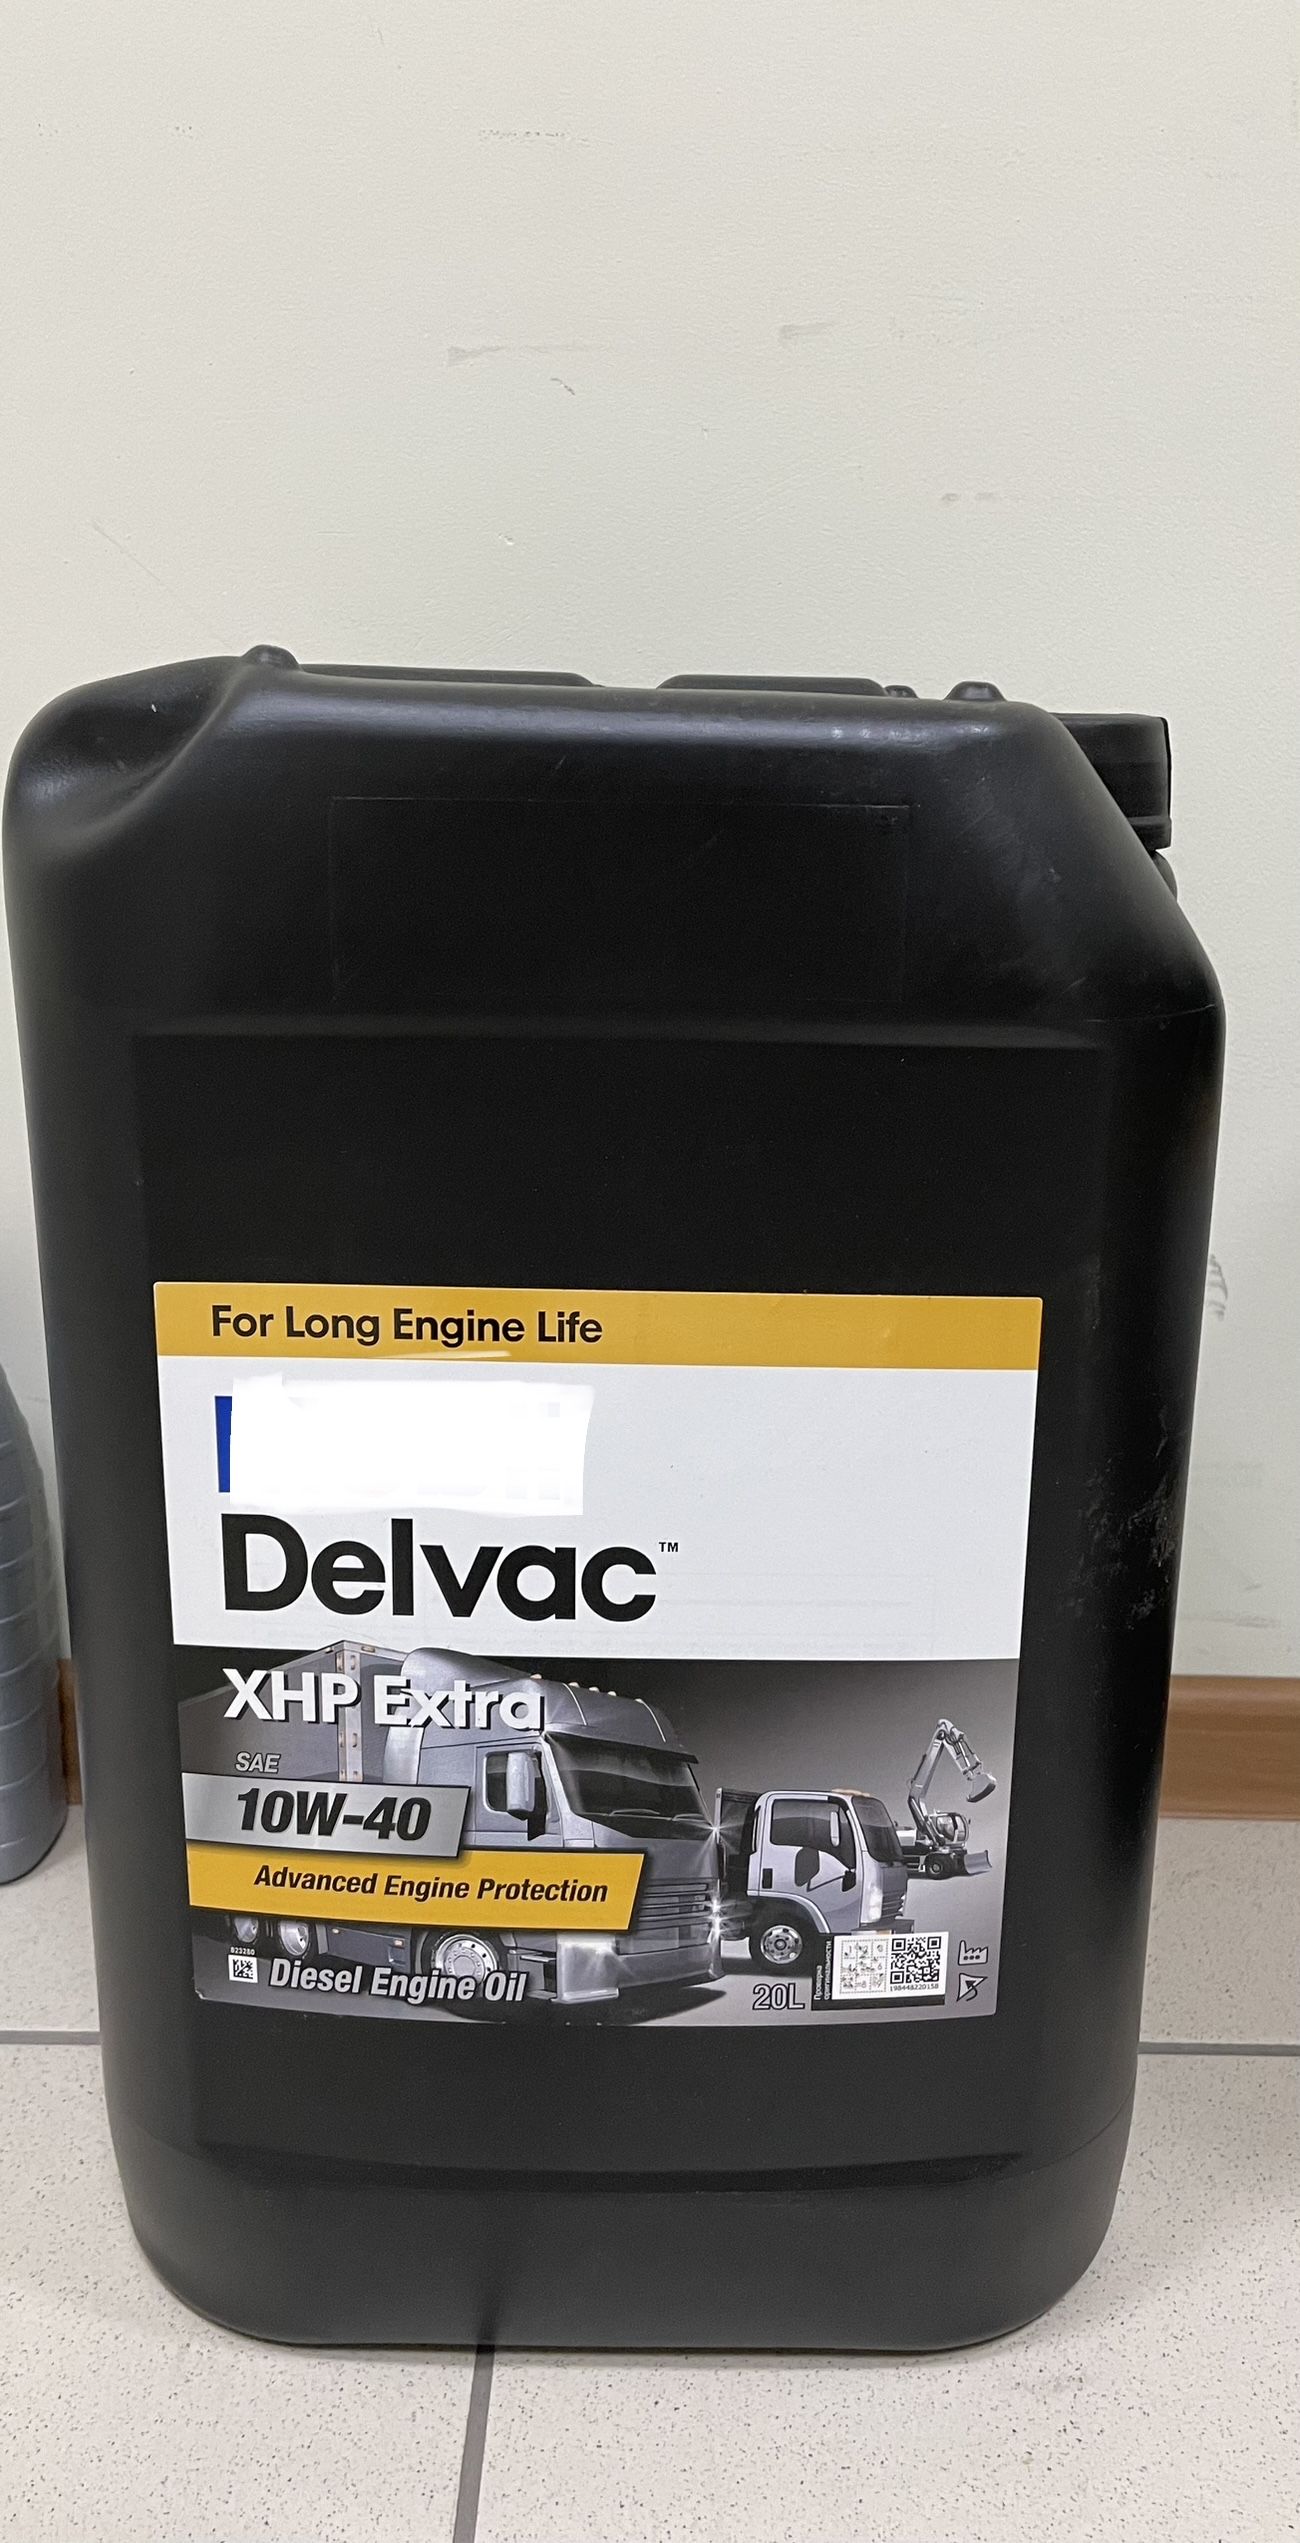 Масло mobil delvac extra 10w 40. Мобил XHP Extra 10w-40. Delvac XHP Extra 10w-40 20 литров. Delvac XHP Extra 10w-40. Мобил Делвак 10w 40.